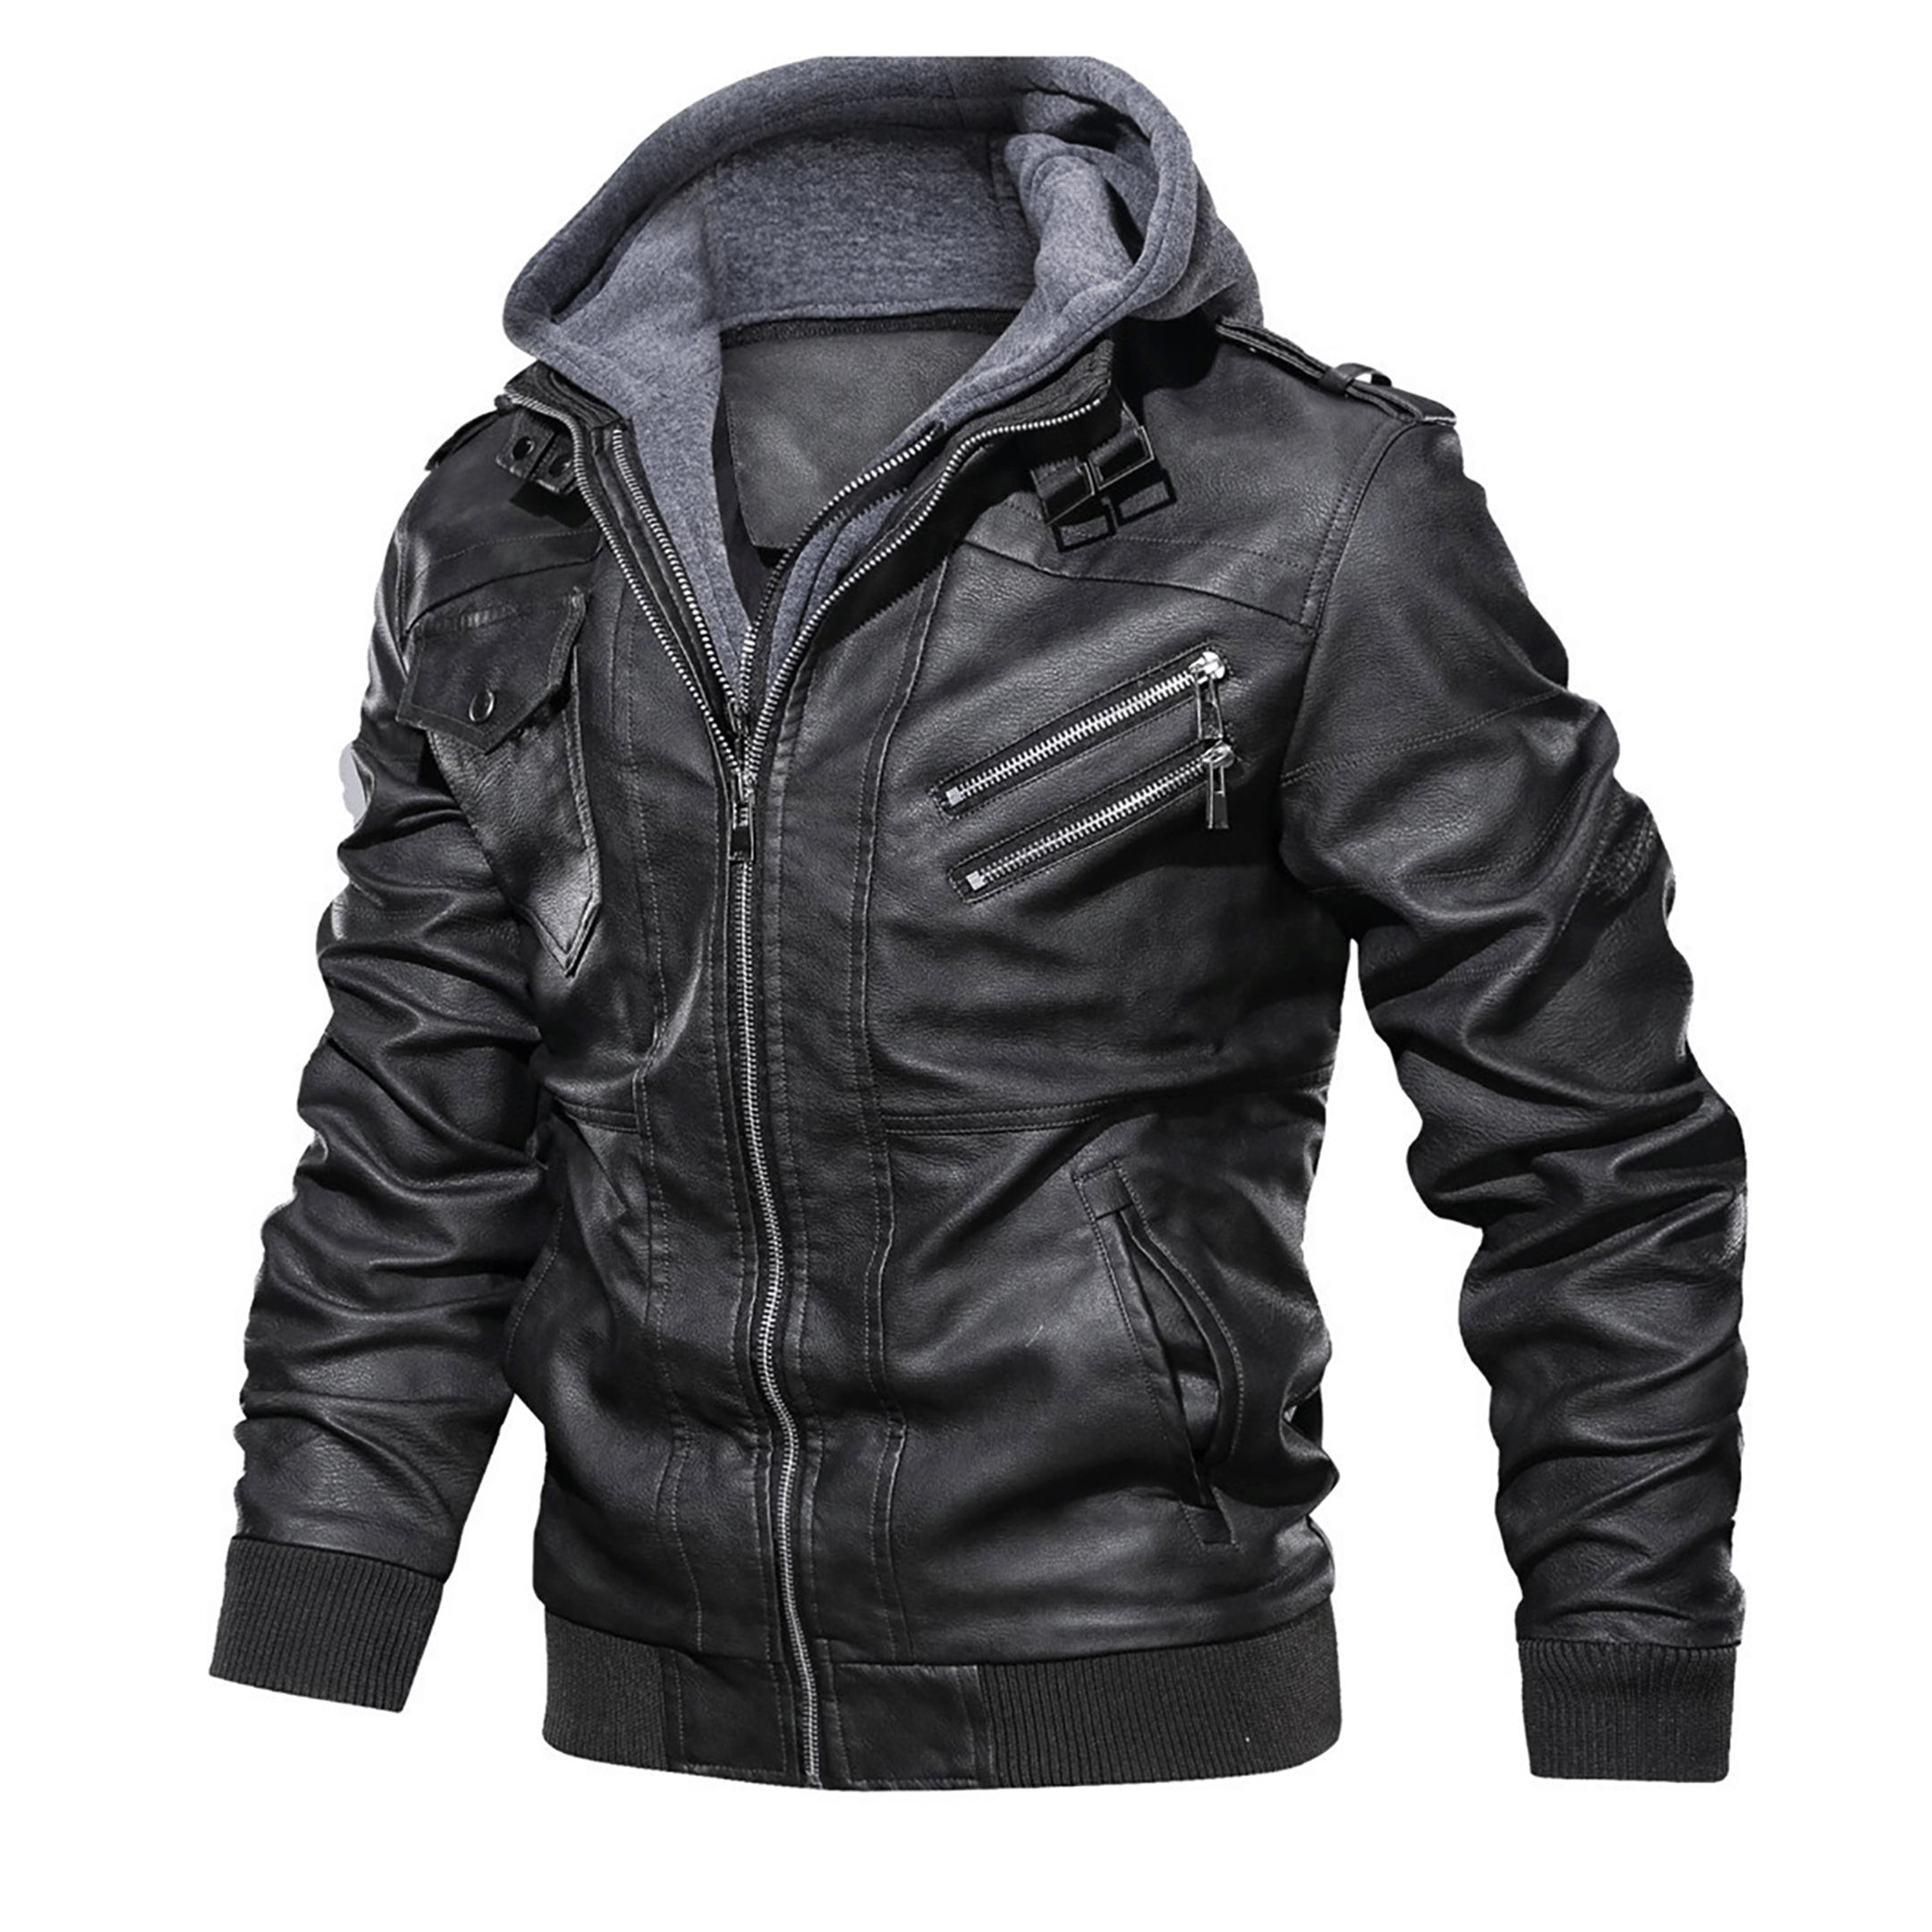 Top leather jackets and latest products 439